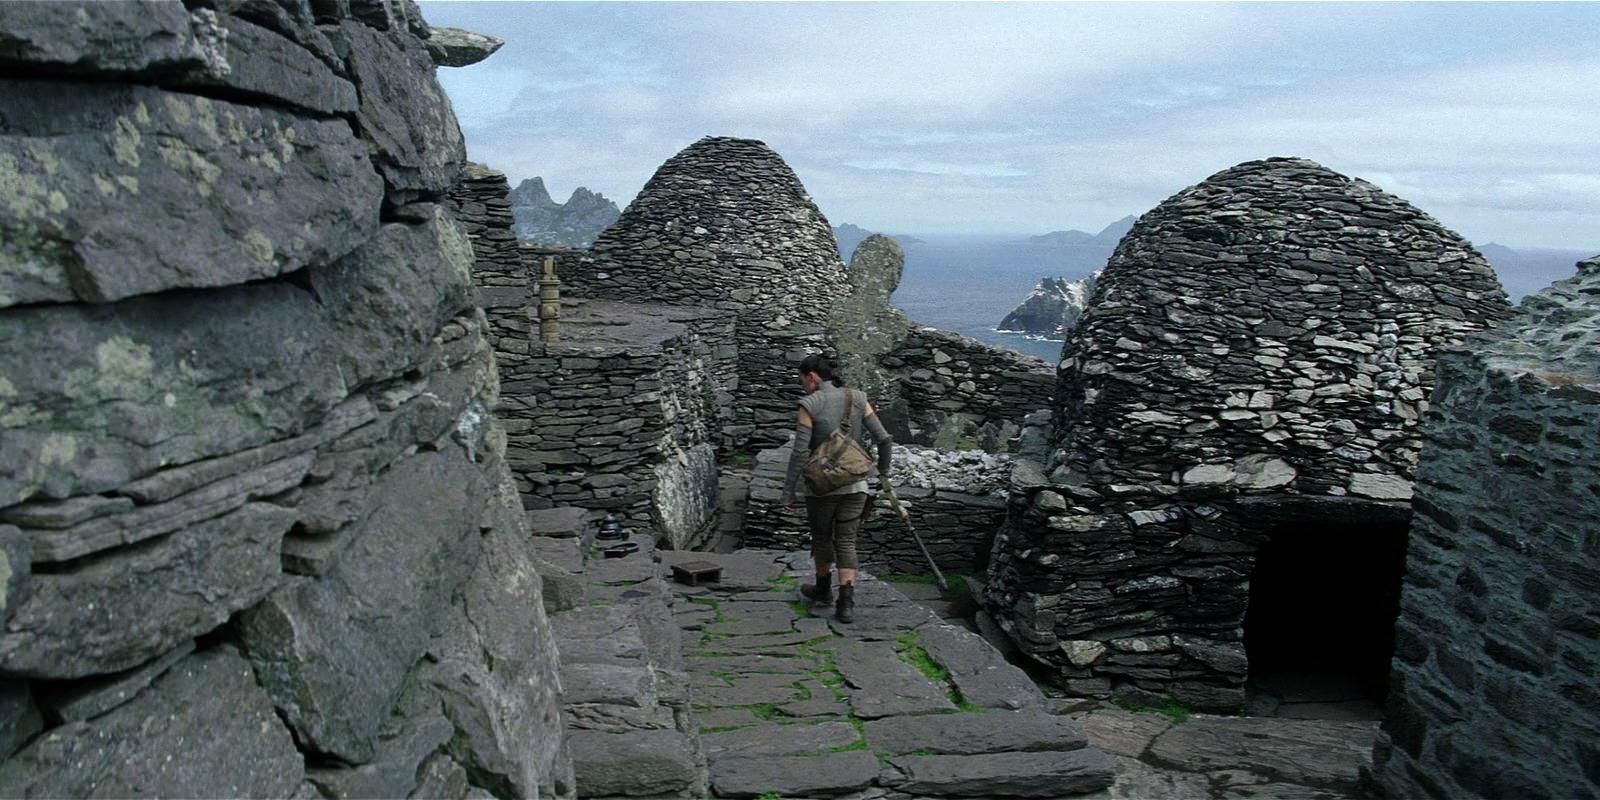 Ahch-To, home of the first Jedi Temple